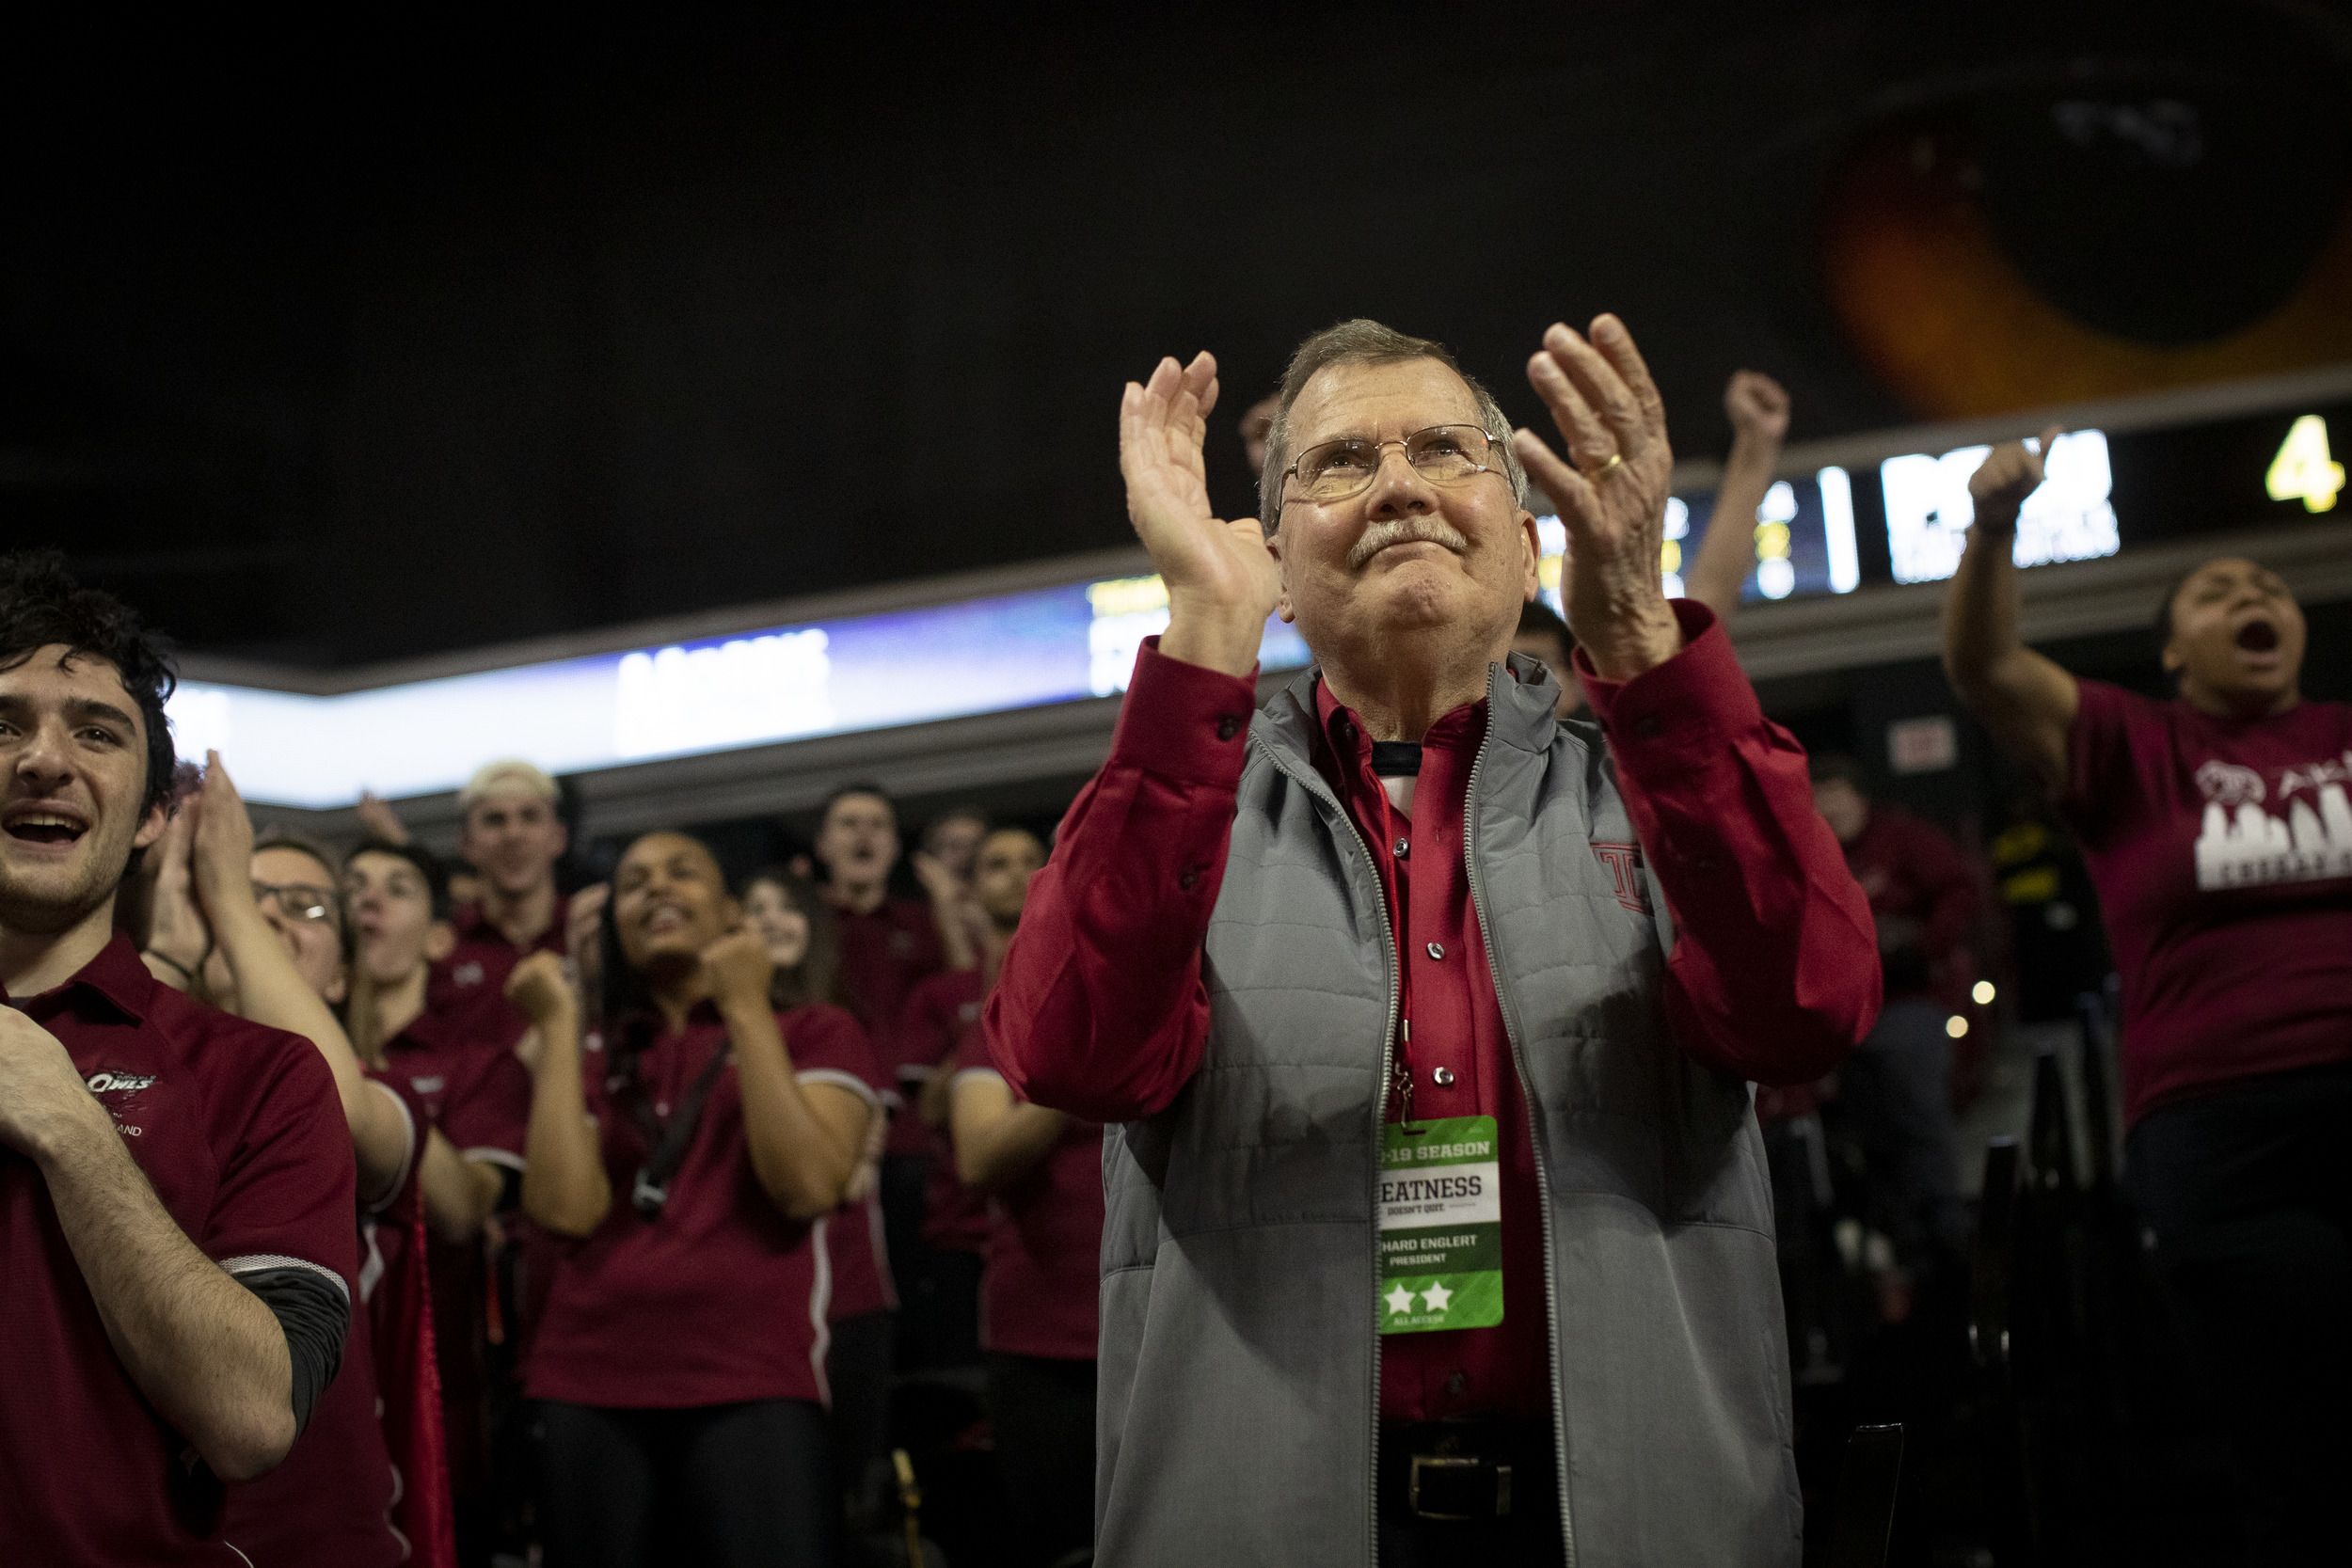 President Englert in the stands at a Temple basketball game, clapping.